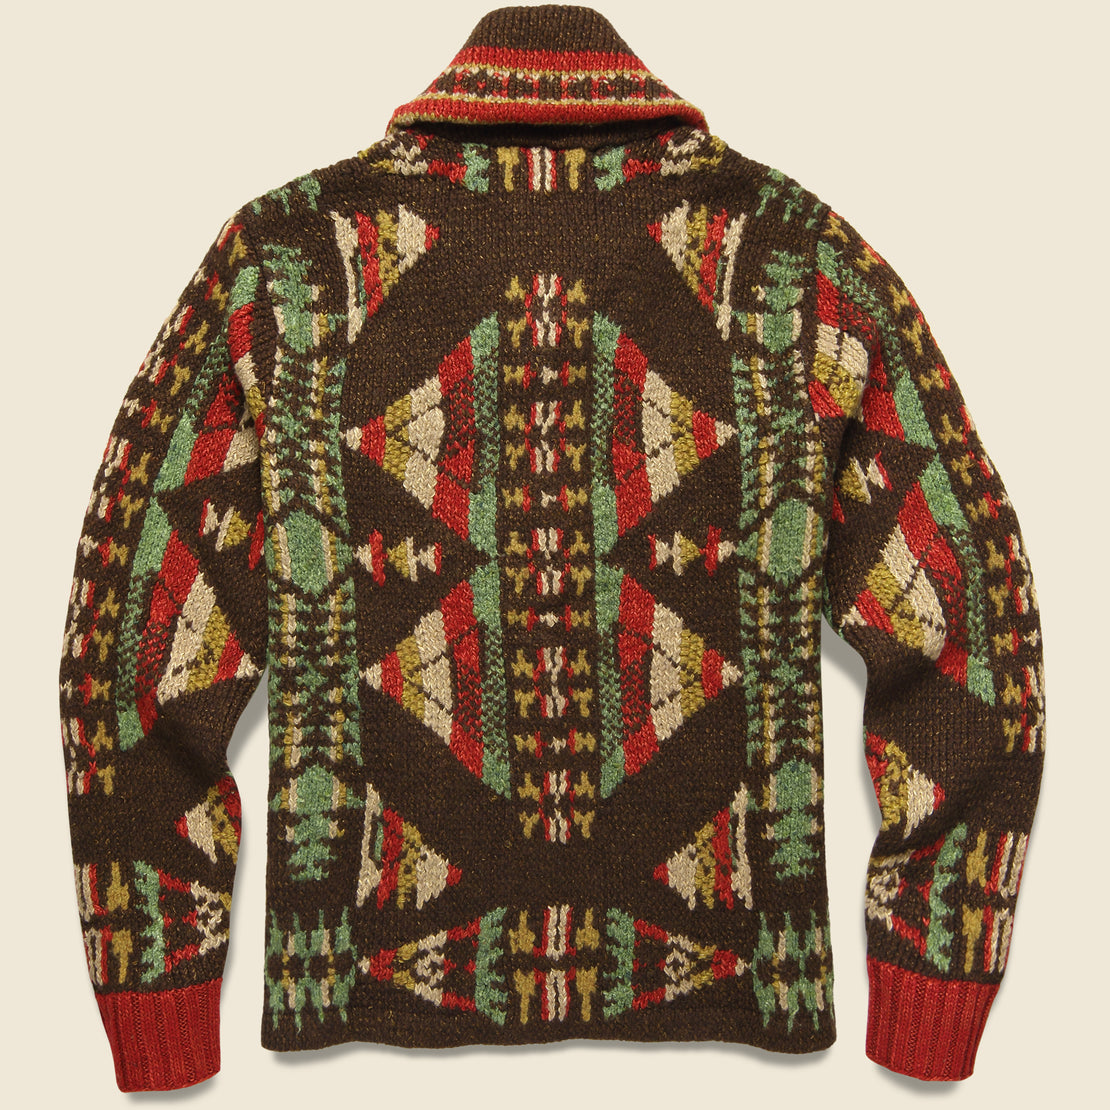 Hand-Knit Jacquard Shawl Cardigan - Red/Multi - RRL - STAG Provisions - Tops - Sweater